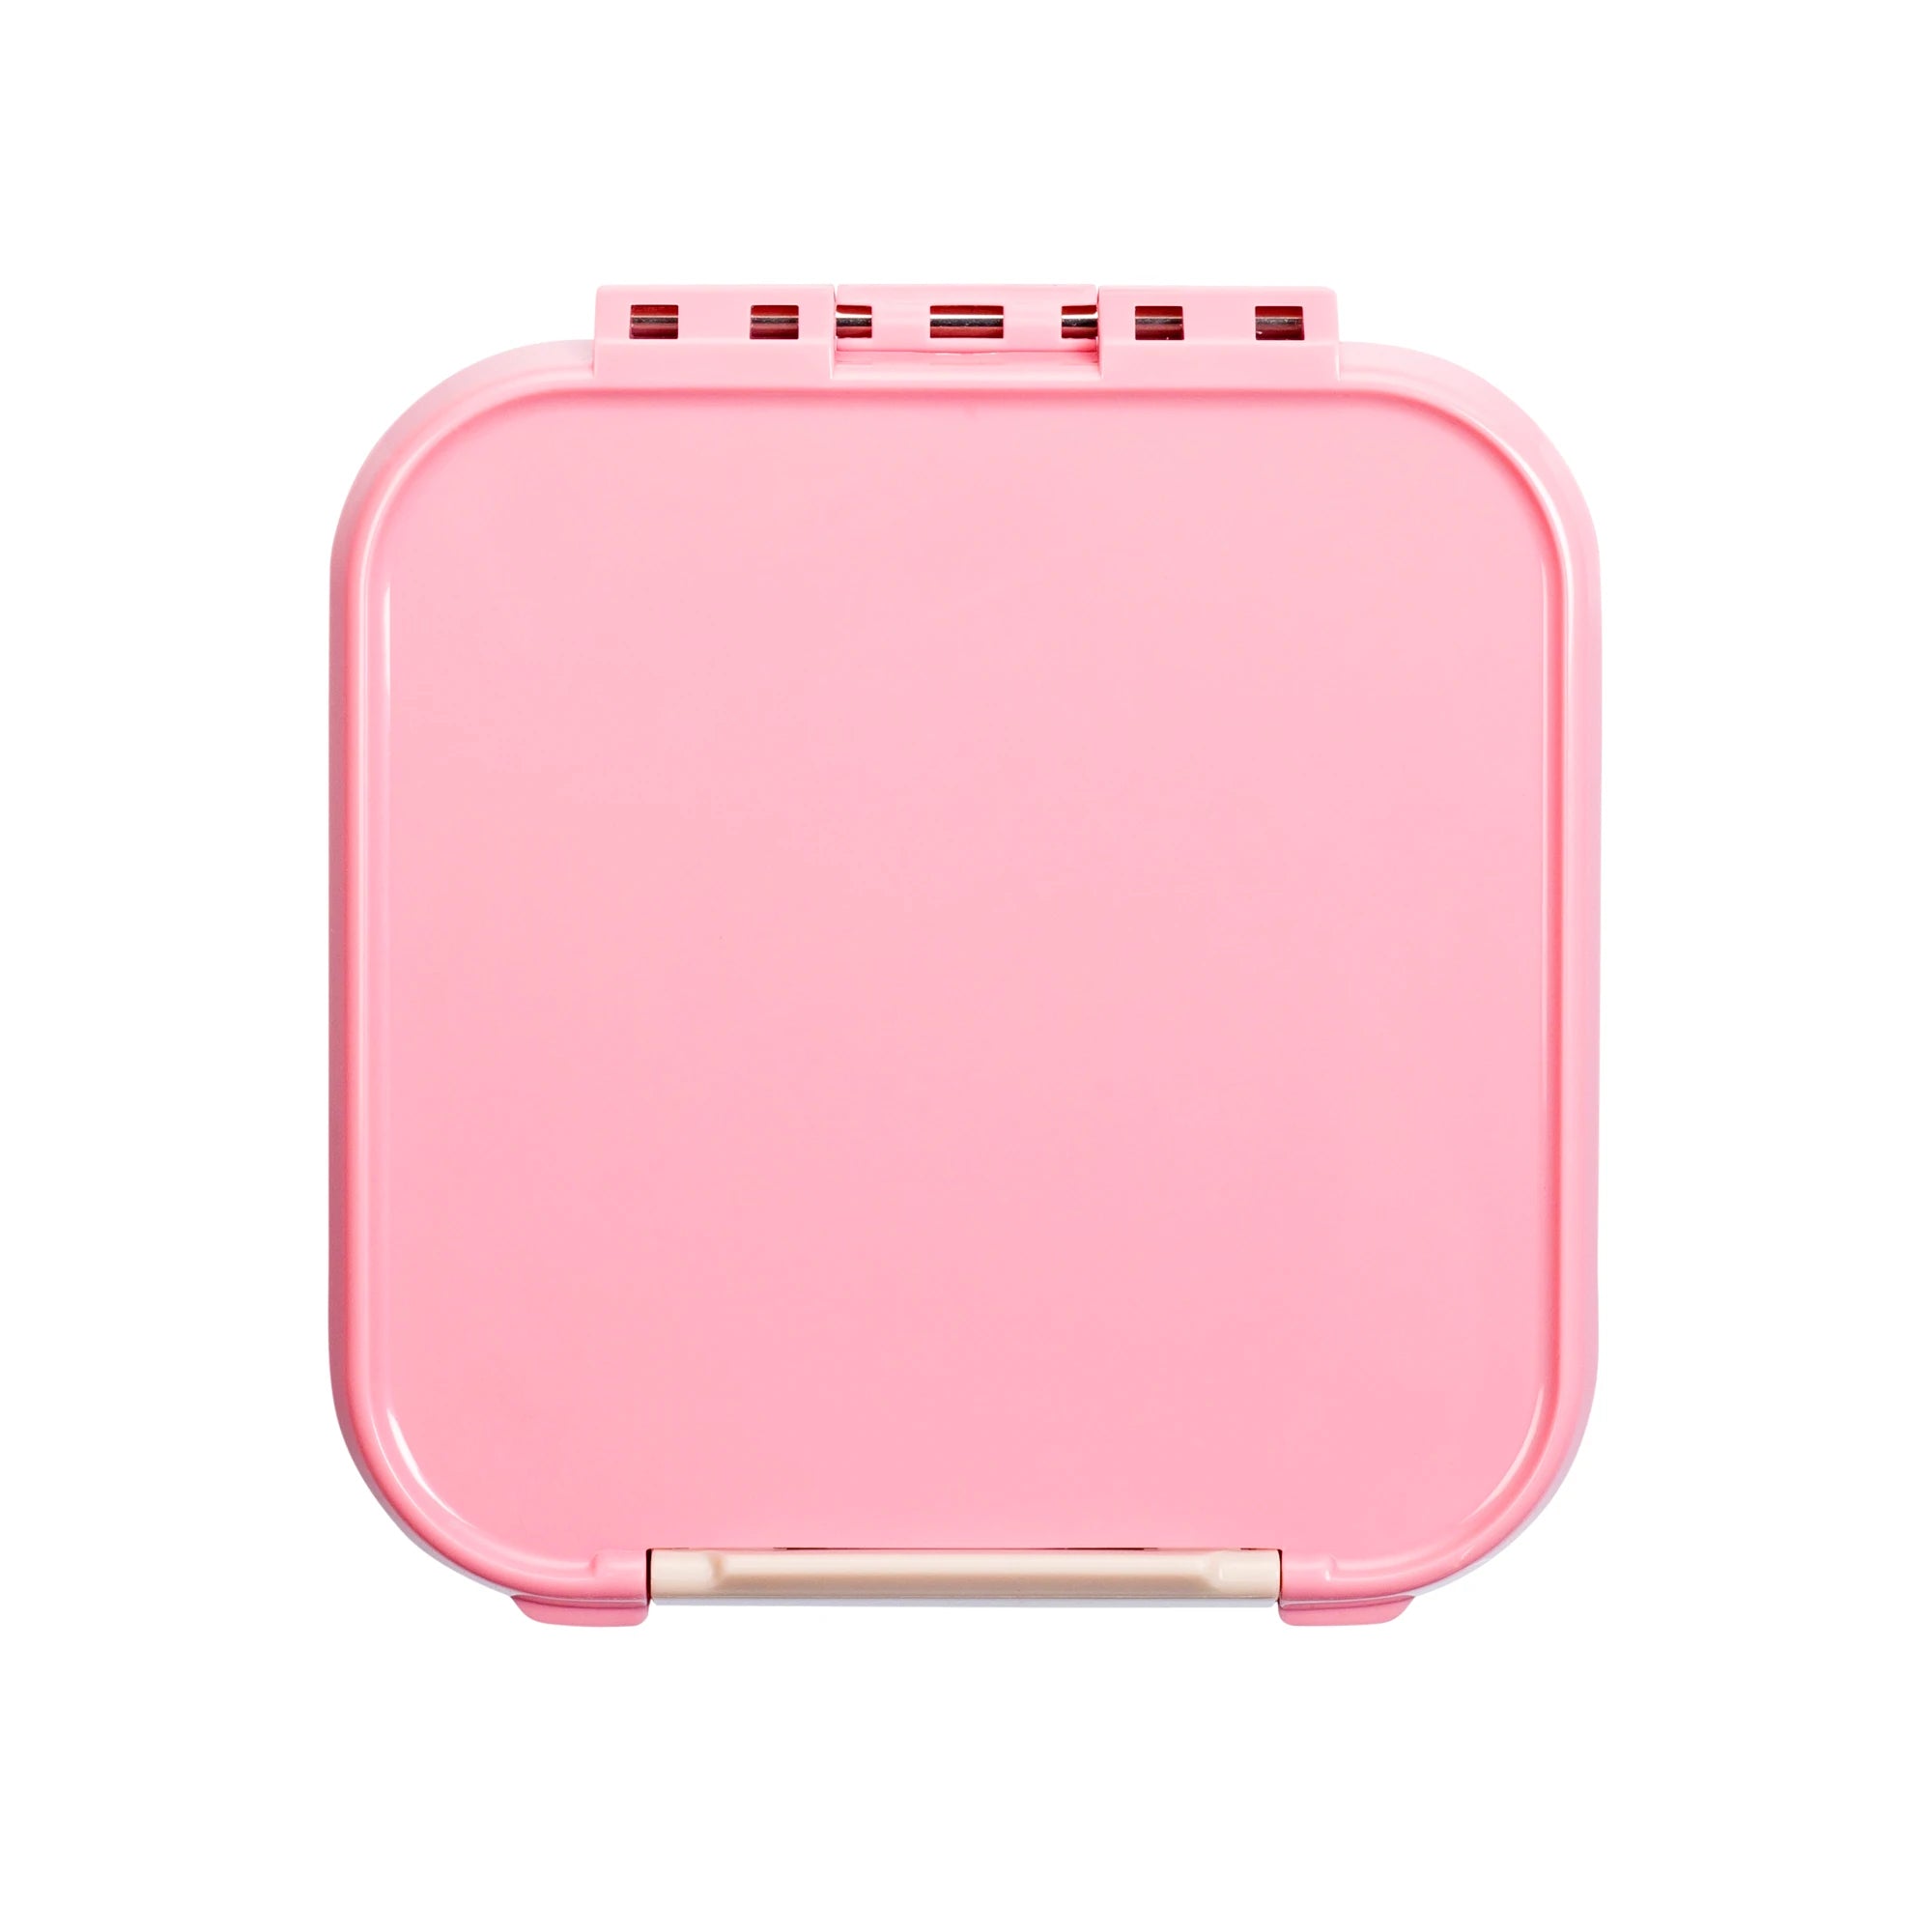 Little Lunch Box Co. Bento Two (Snack Size): Blush Pink